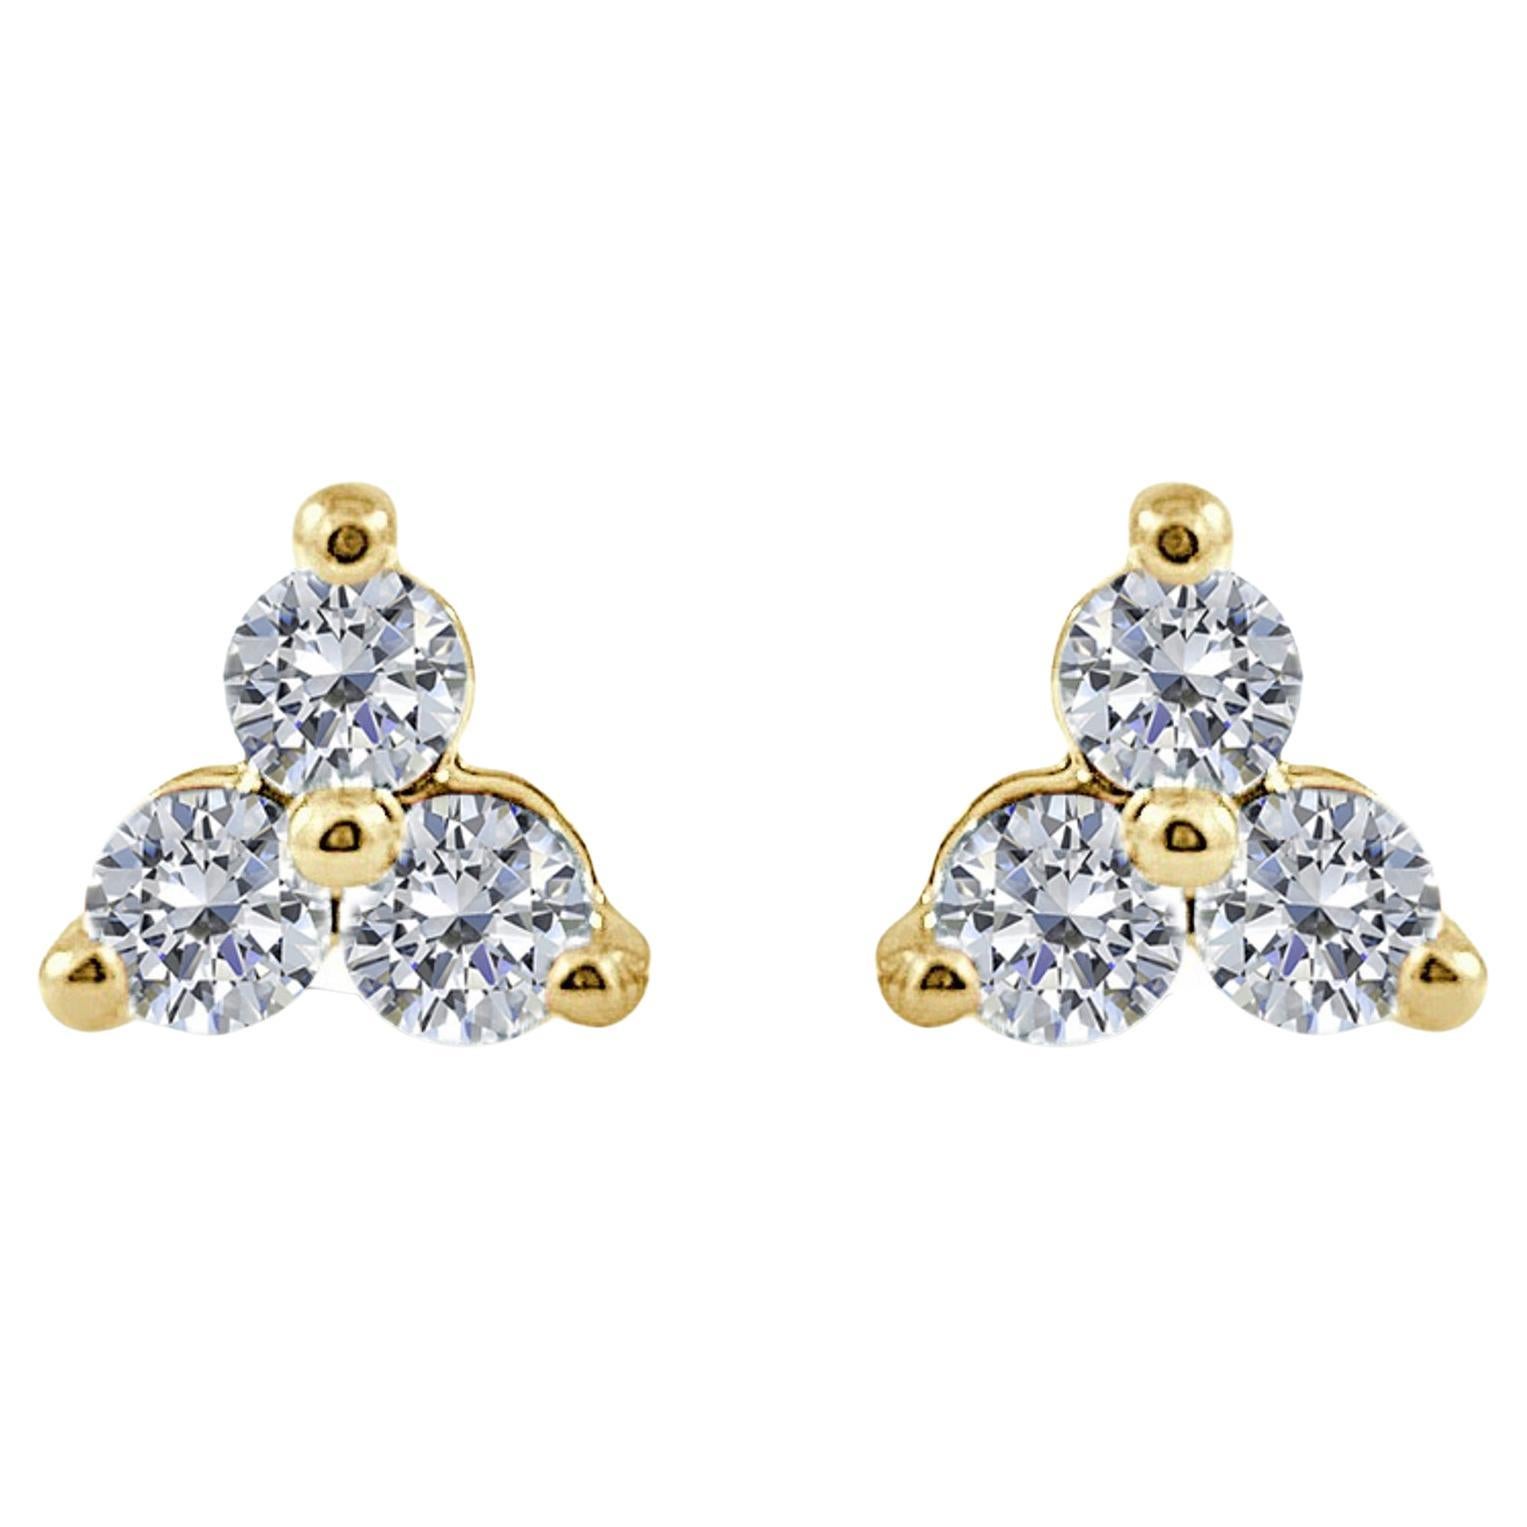 14K Yellow Gold 1.00ct Diamond 3 Stone Earrings for Her